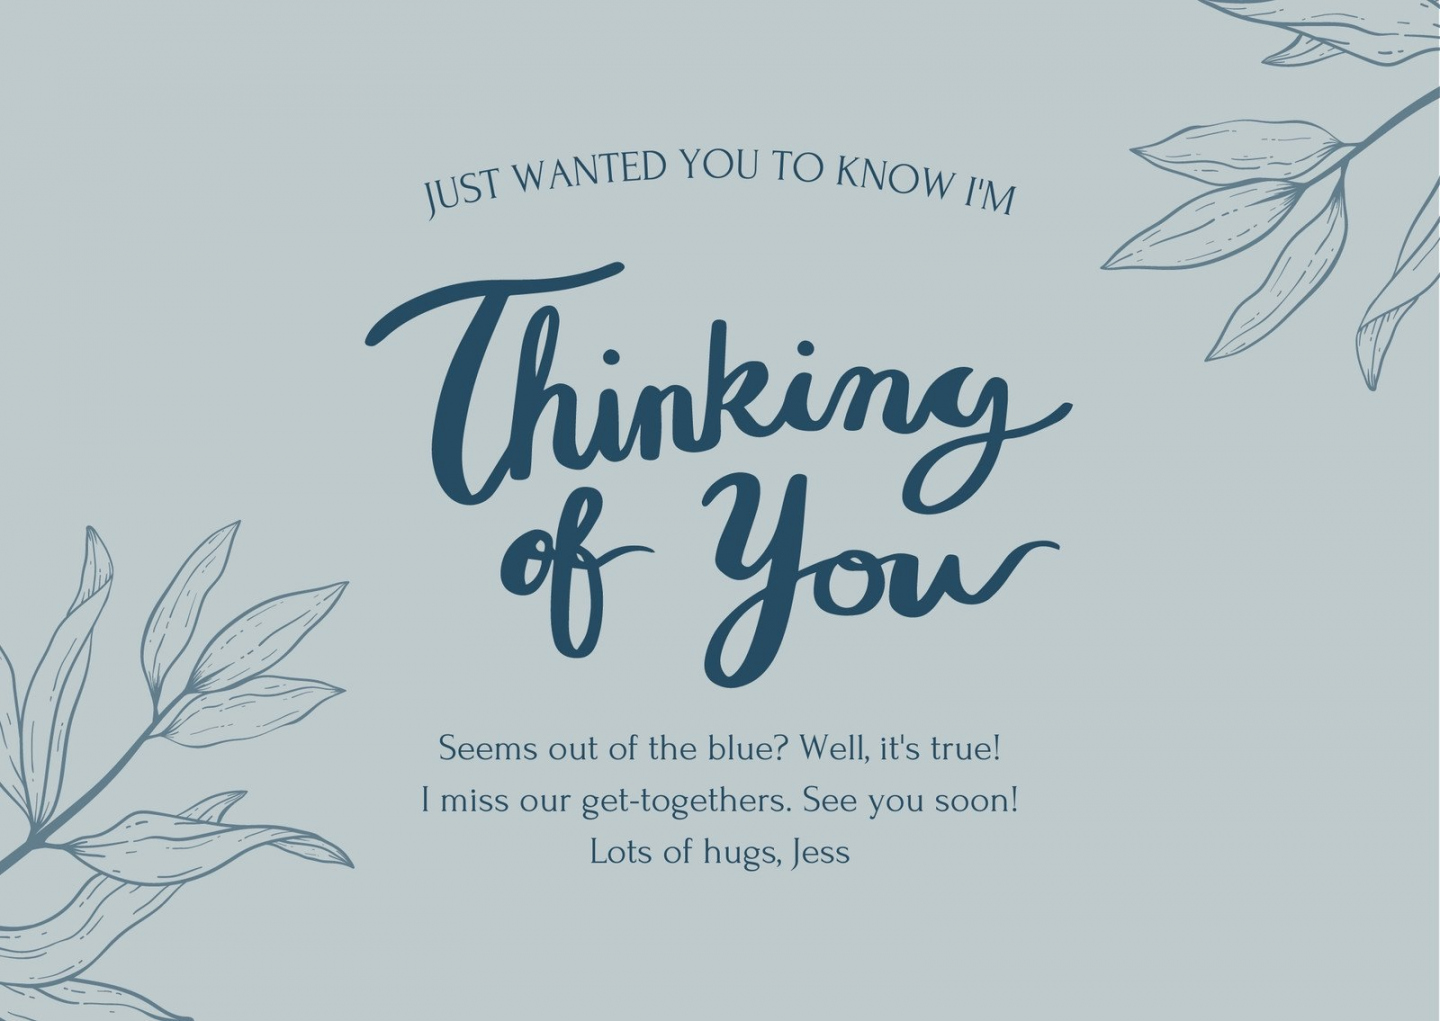 Free, editable, printable Thinking of You card templates  Canva - FREE Printables - Free Printable Thinking Of You Cards